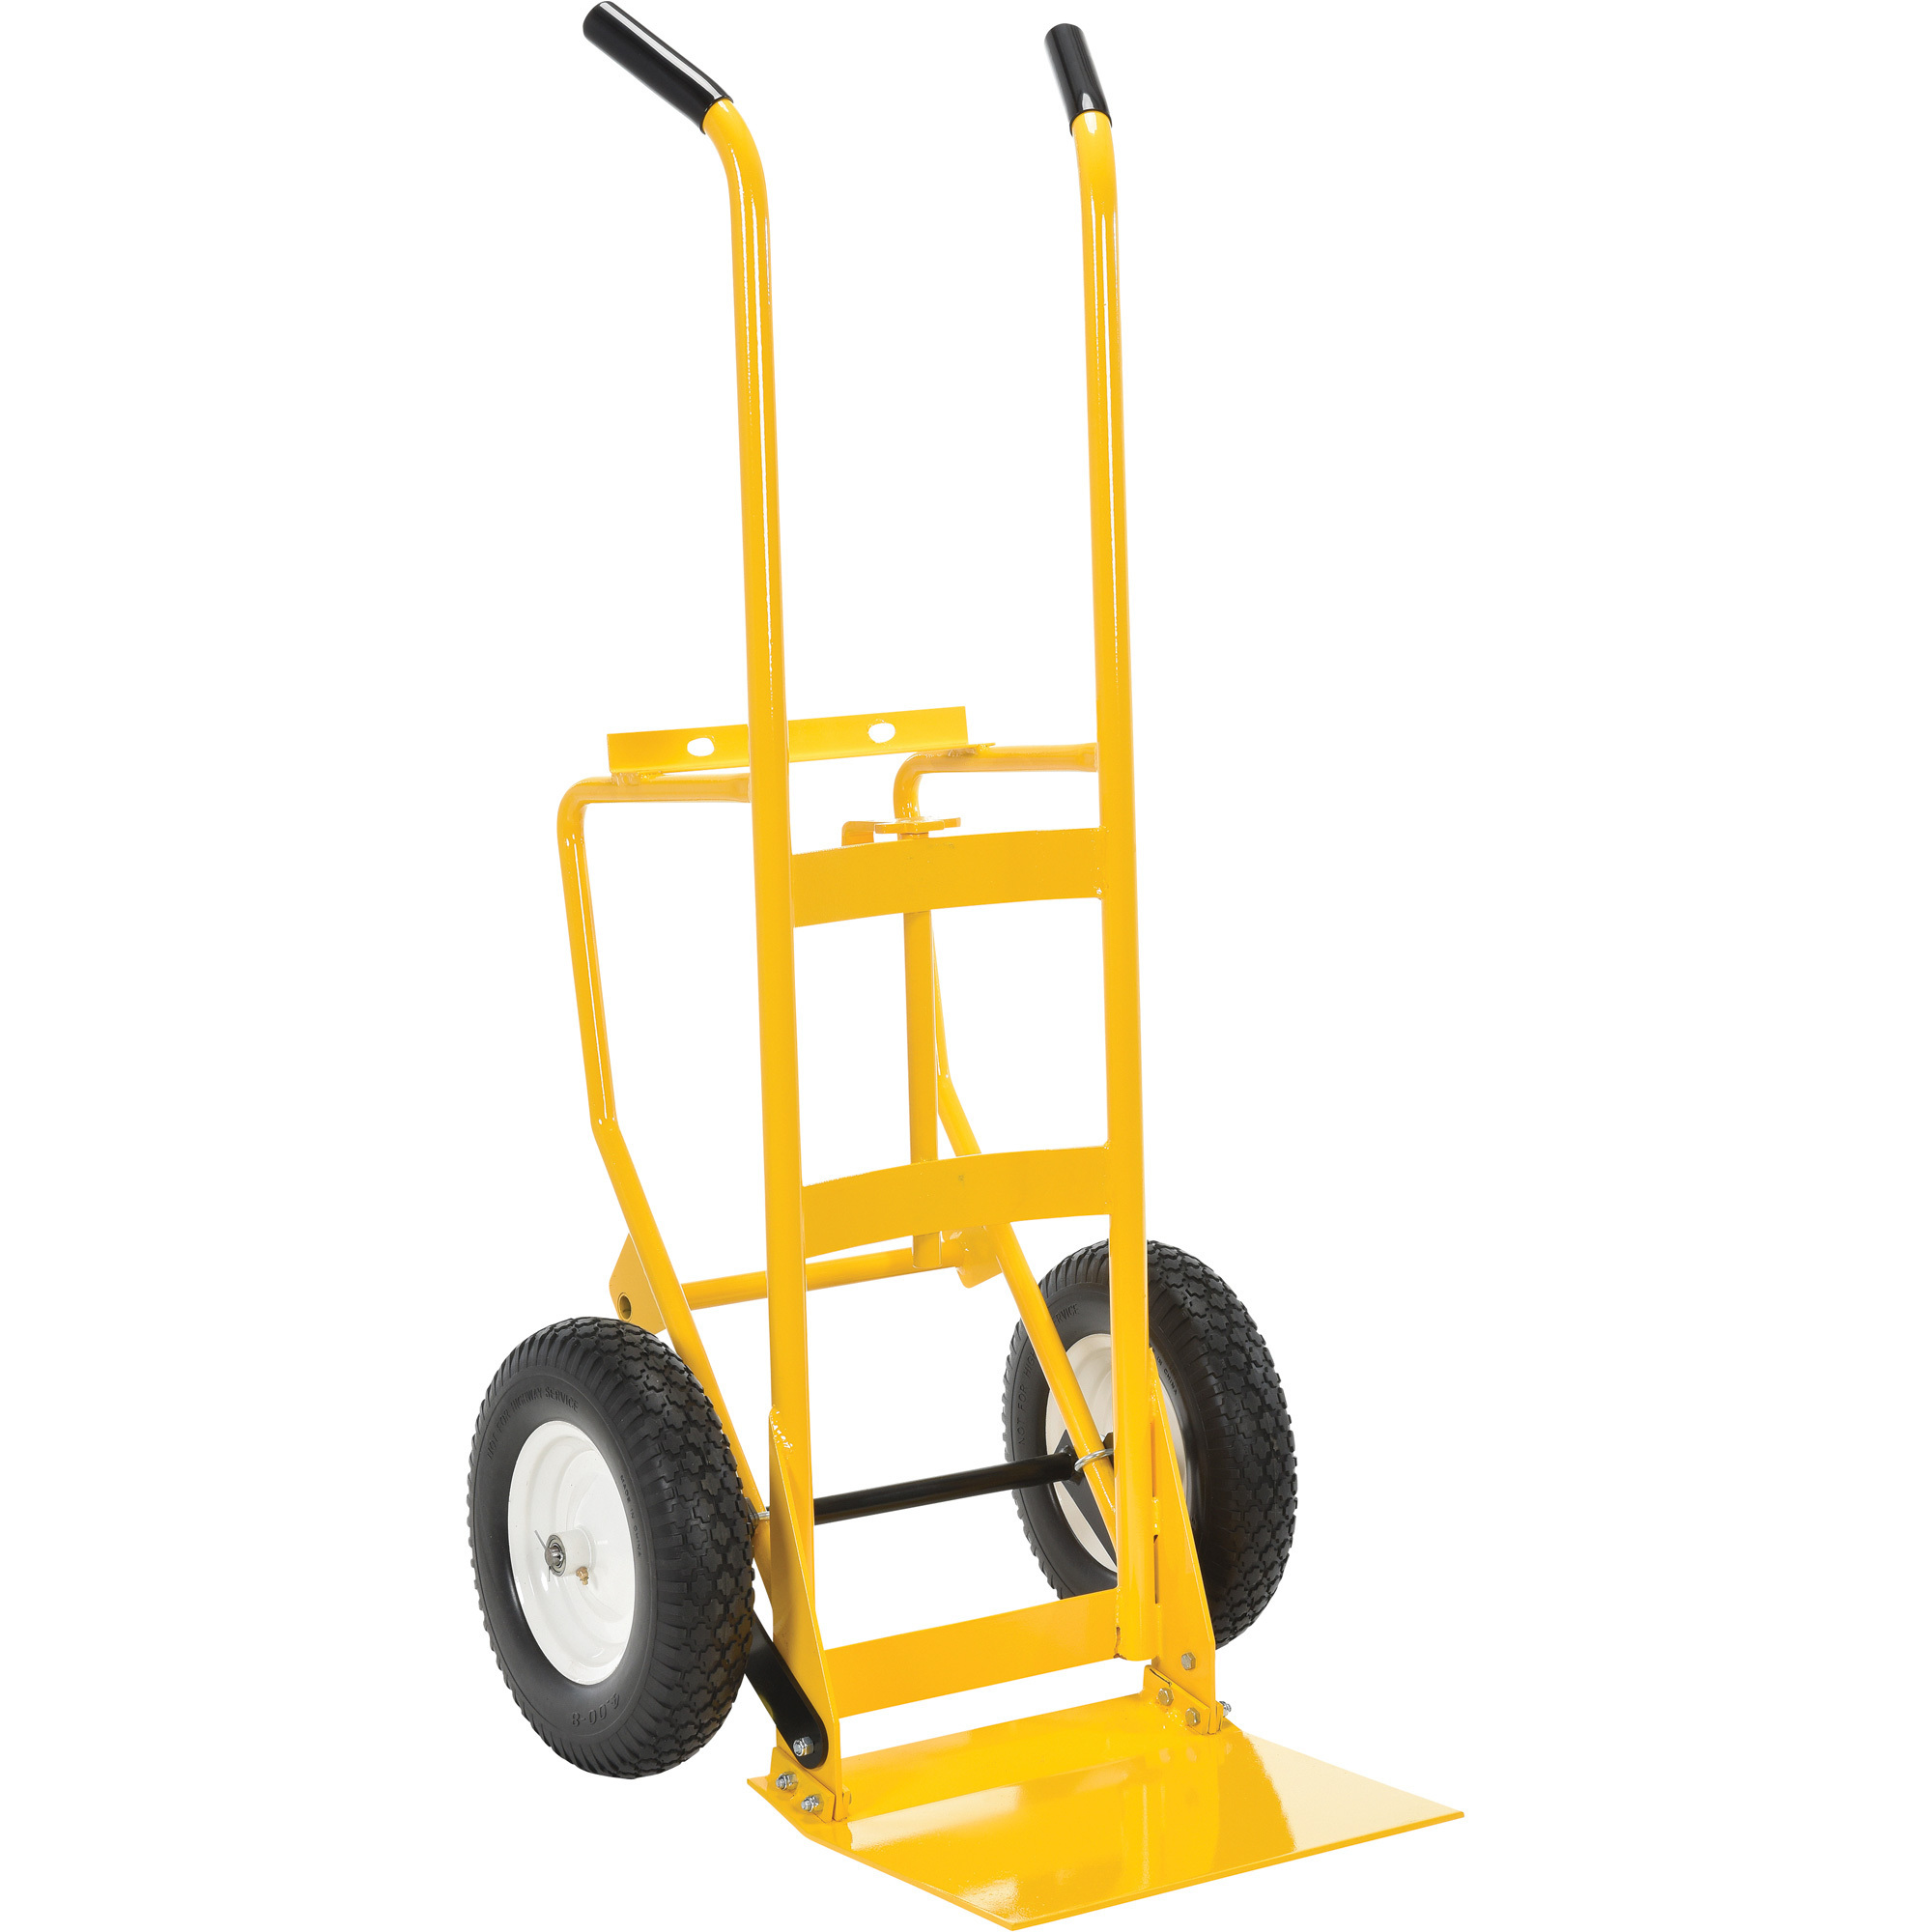 Vestil Multi-Purpose Drum and Hand Truck with Foam-Filled Tires, 750-Lb. Capacity, Model DCHT-1-FF